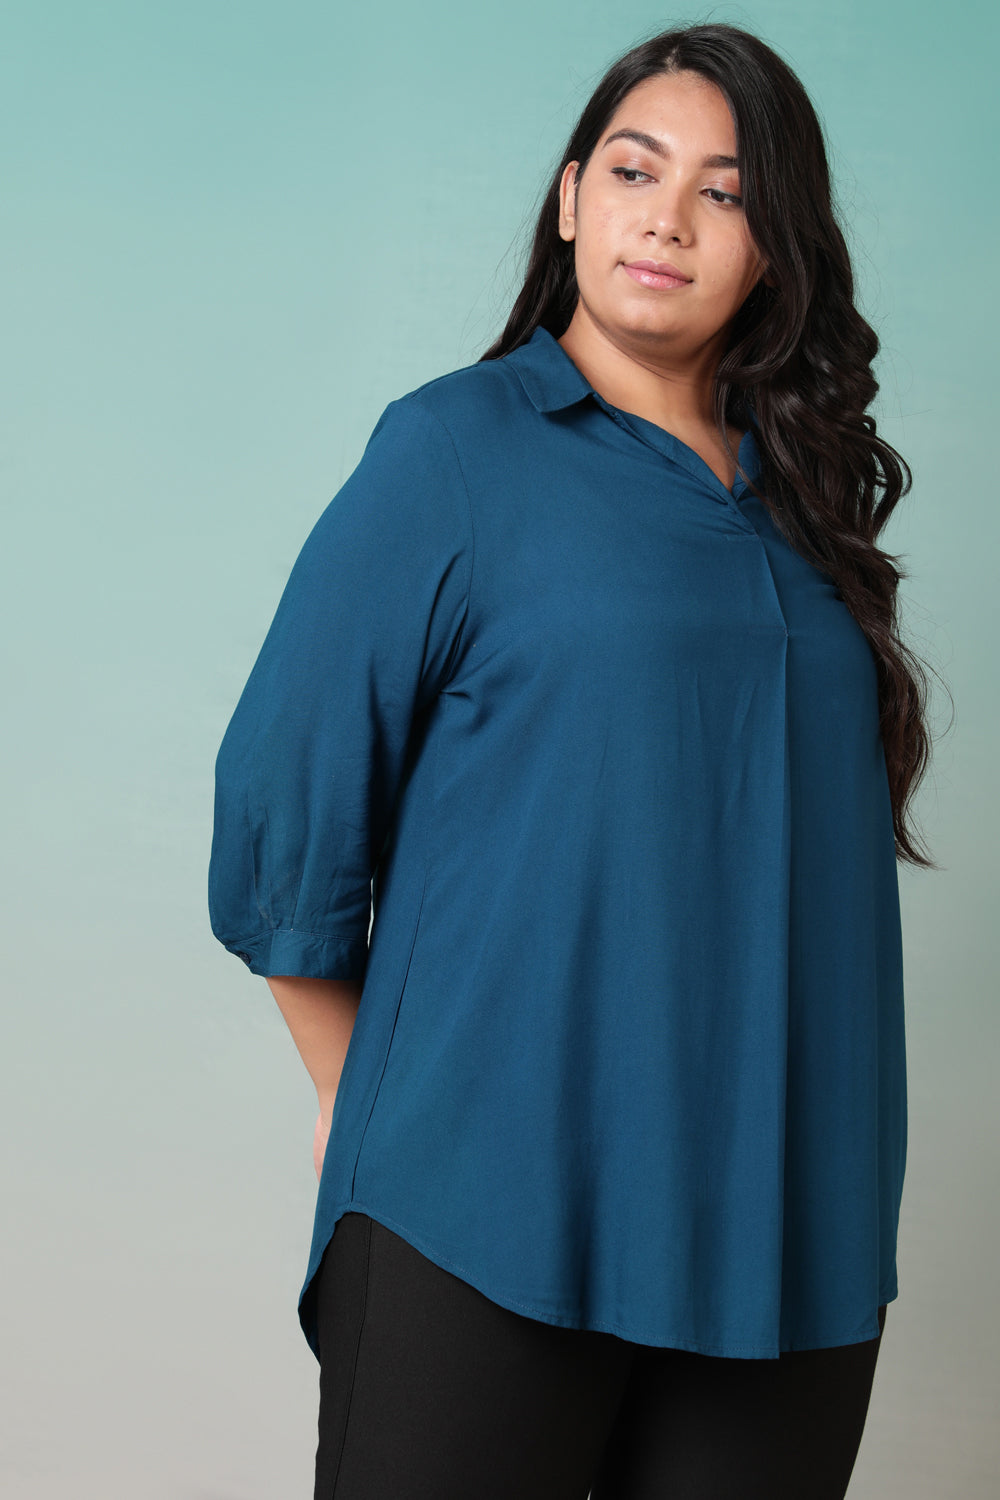 Teal Centre Pleat Top for Women